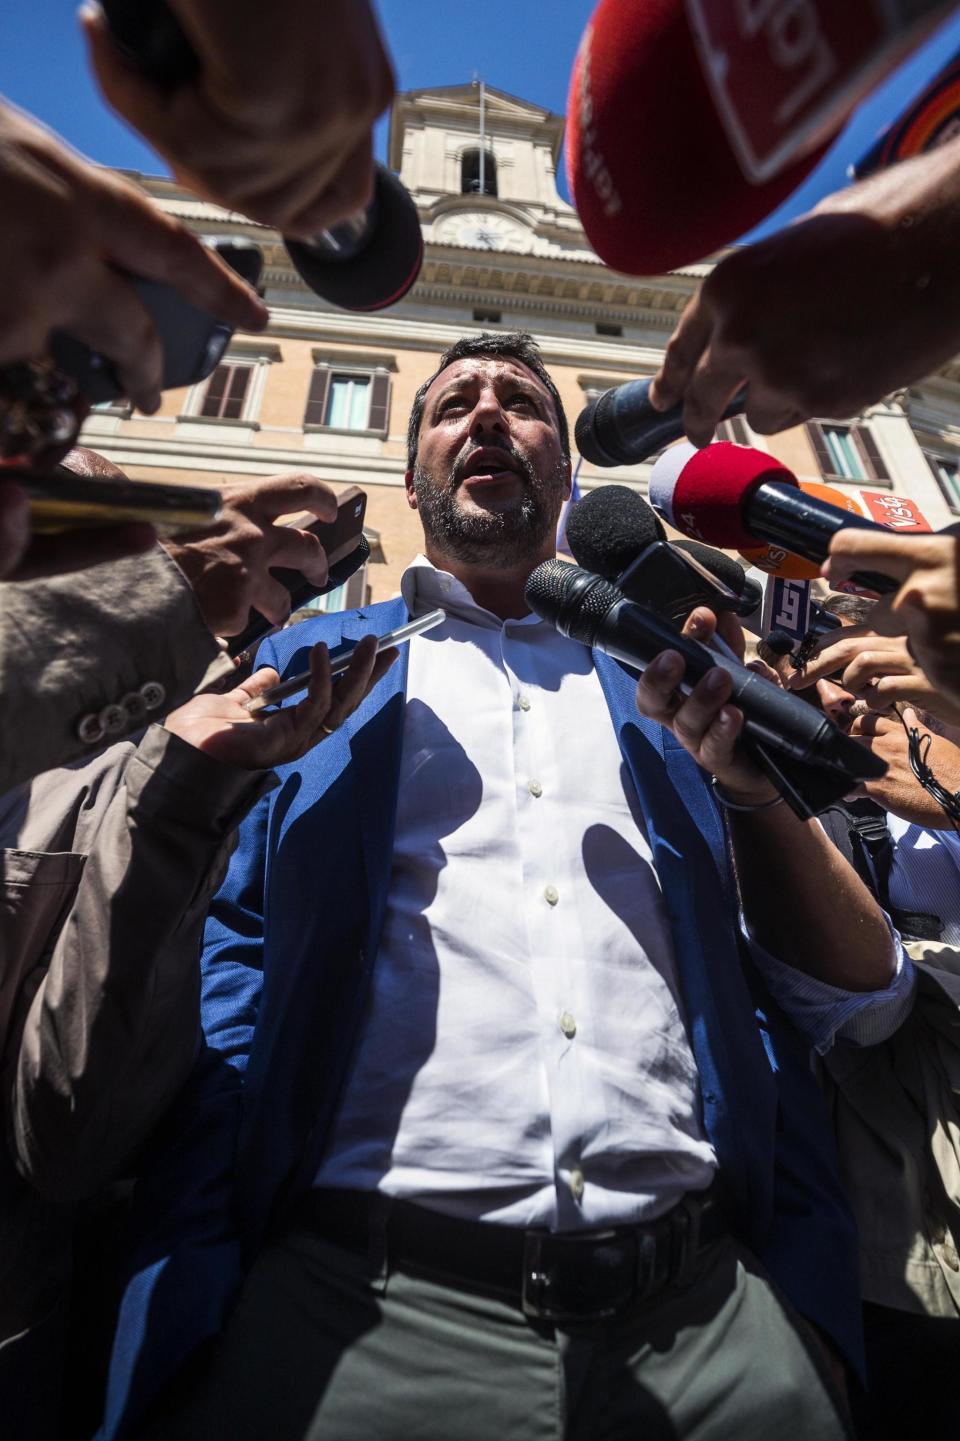 Italian Deputy-Premier and Interior Minister, Matteo Salvini, talks to media in Rome, Wednesday, Aug. 21, 2019. Italy could see elections as early as this fall after Italian Premier Giuseppe Conte resigned amid the collapse of the 14-month-old populist government. Matteo Salvini's right-wing League party sought a no-confidence vote against Conte earlier this month, a stunningly bold move for the government's junior coalition partner. (Angelo Carconi/ANSA via AP)